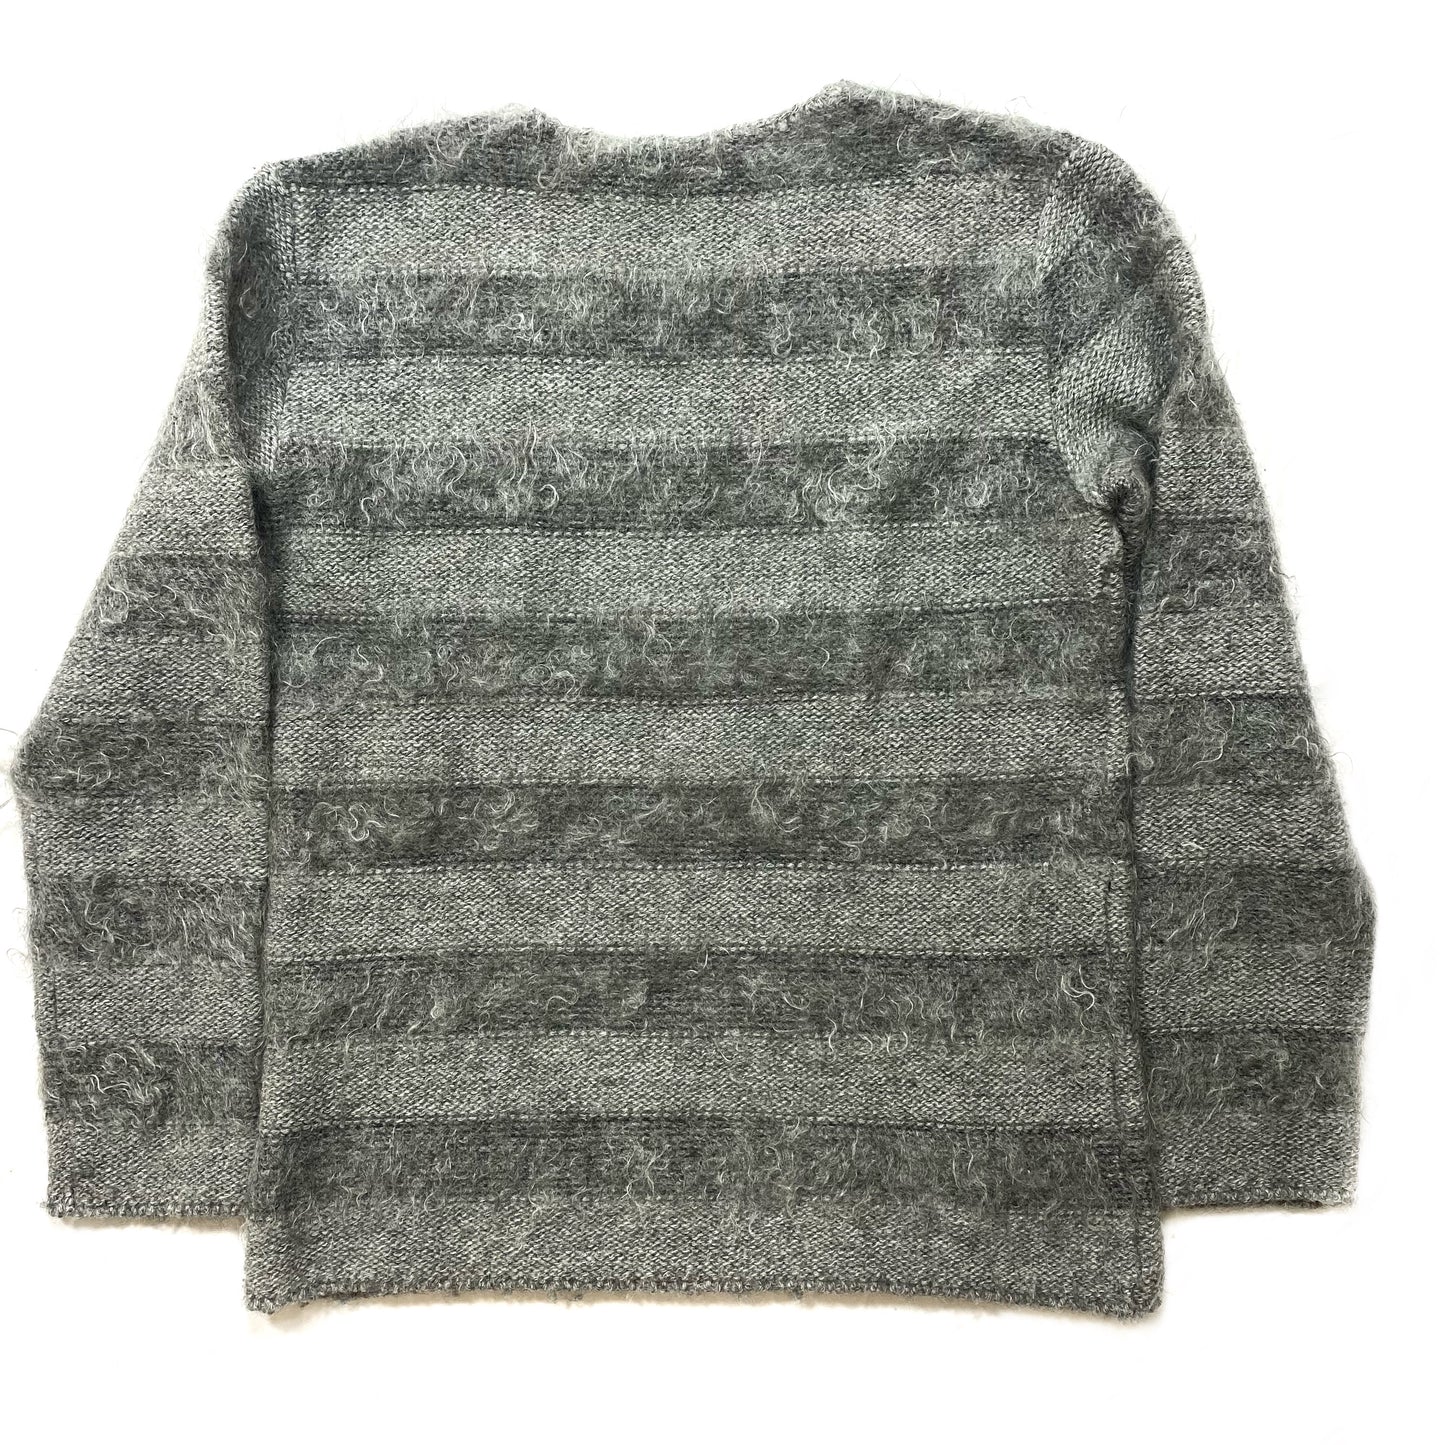 Undercover Striped Mohair Sweater A/W03 “Paperdoll” Large